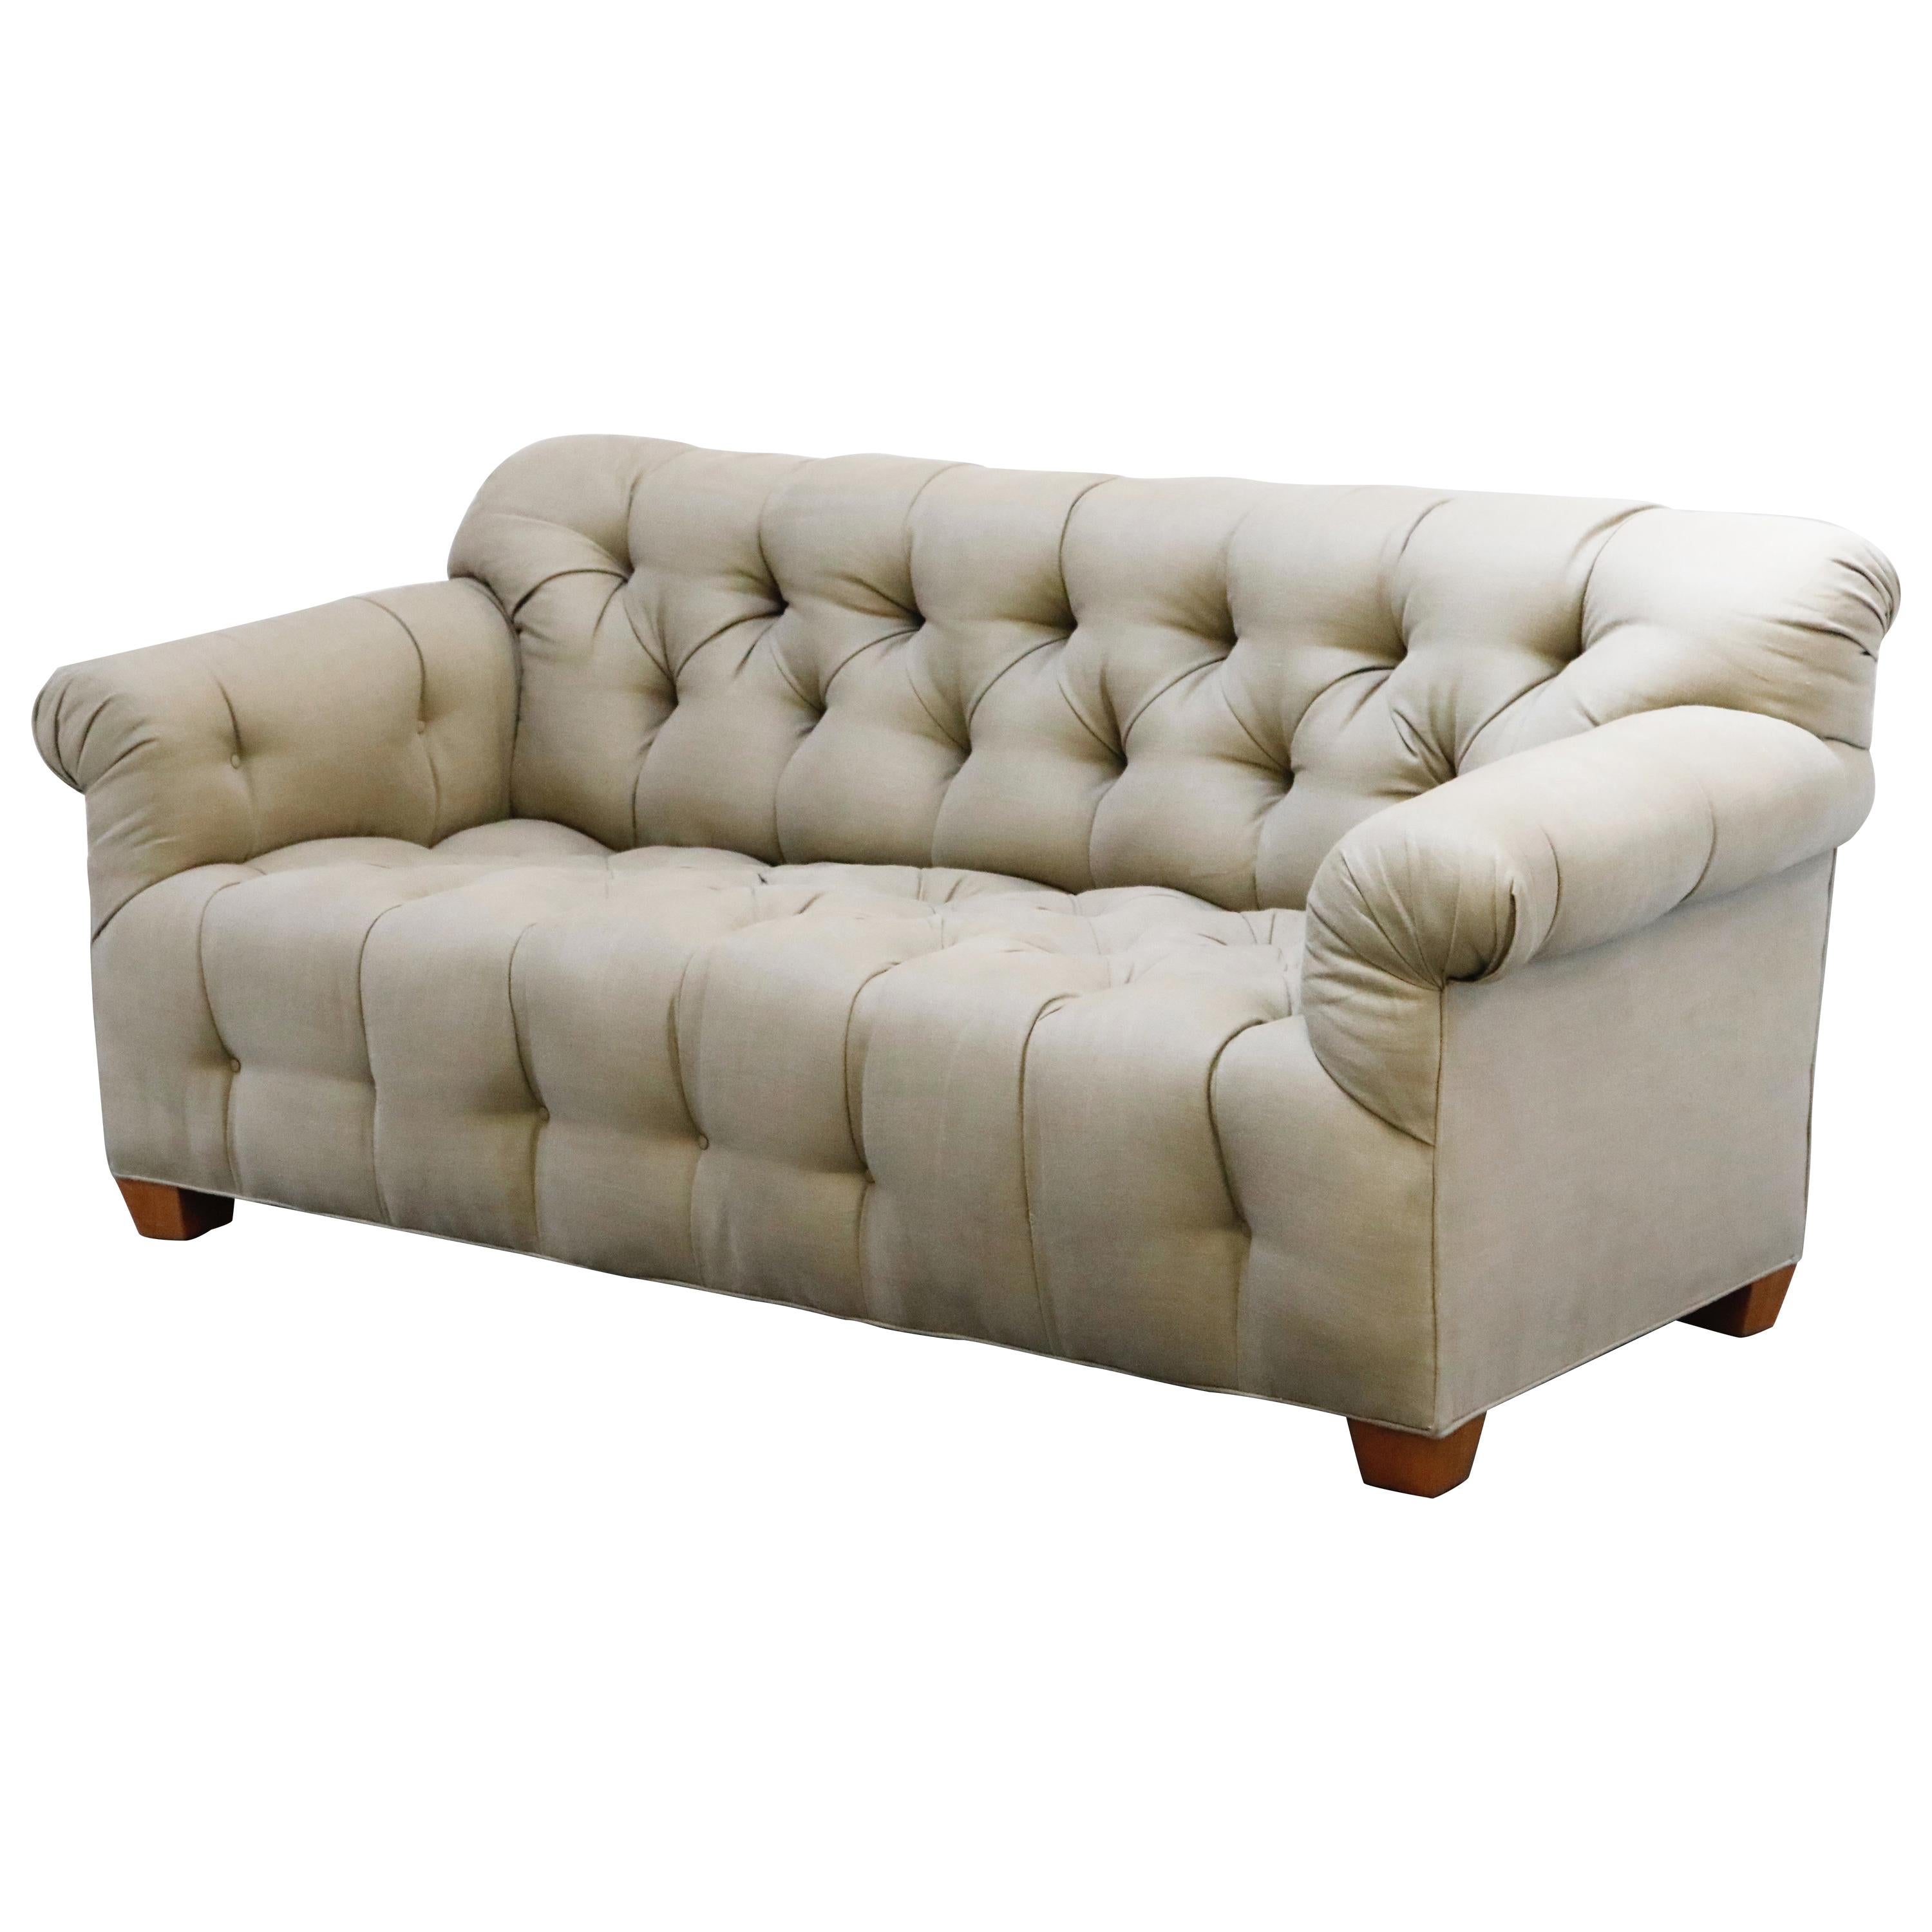 Tufted Chesterfield Style Sofa Attributed to Michael Taylor, circa 1990s